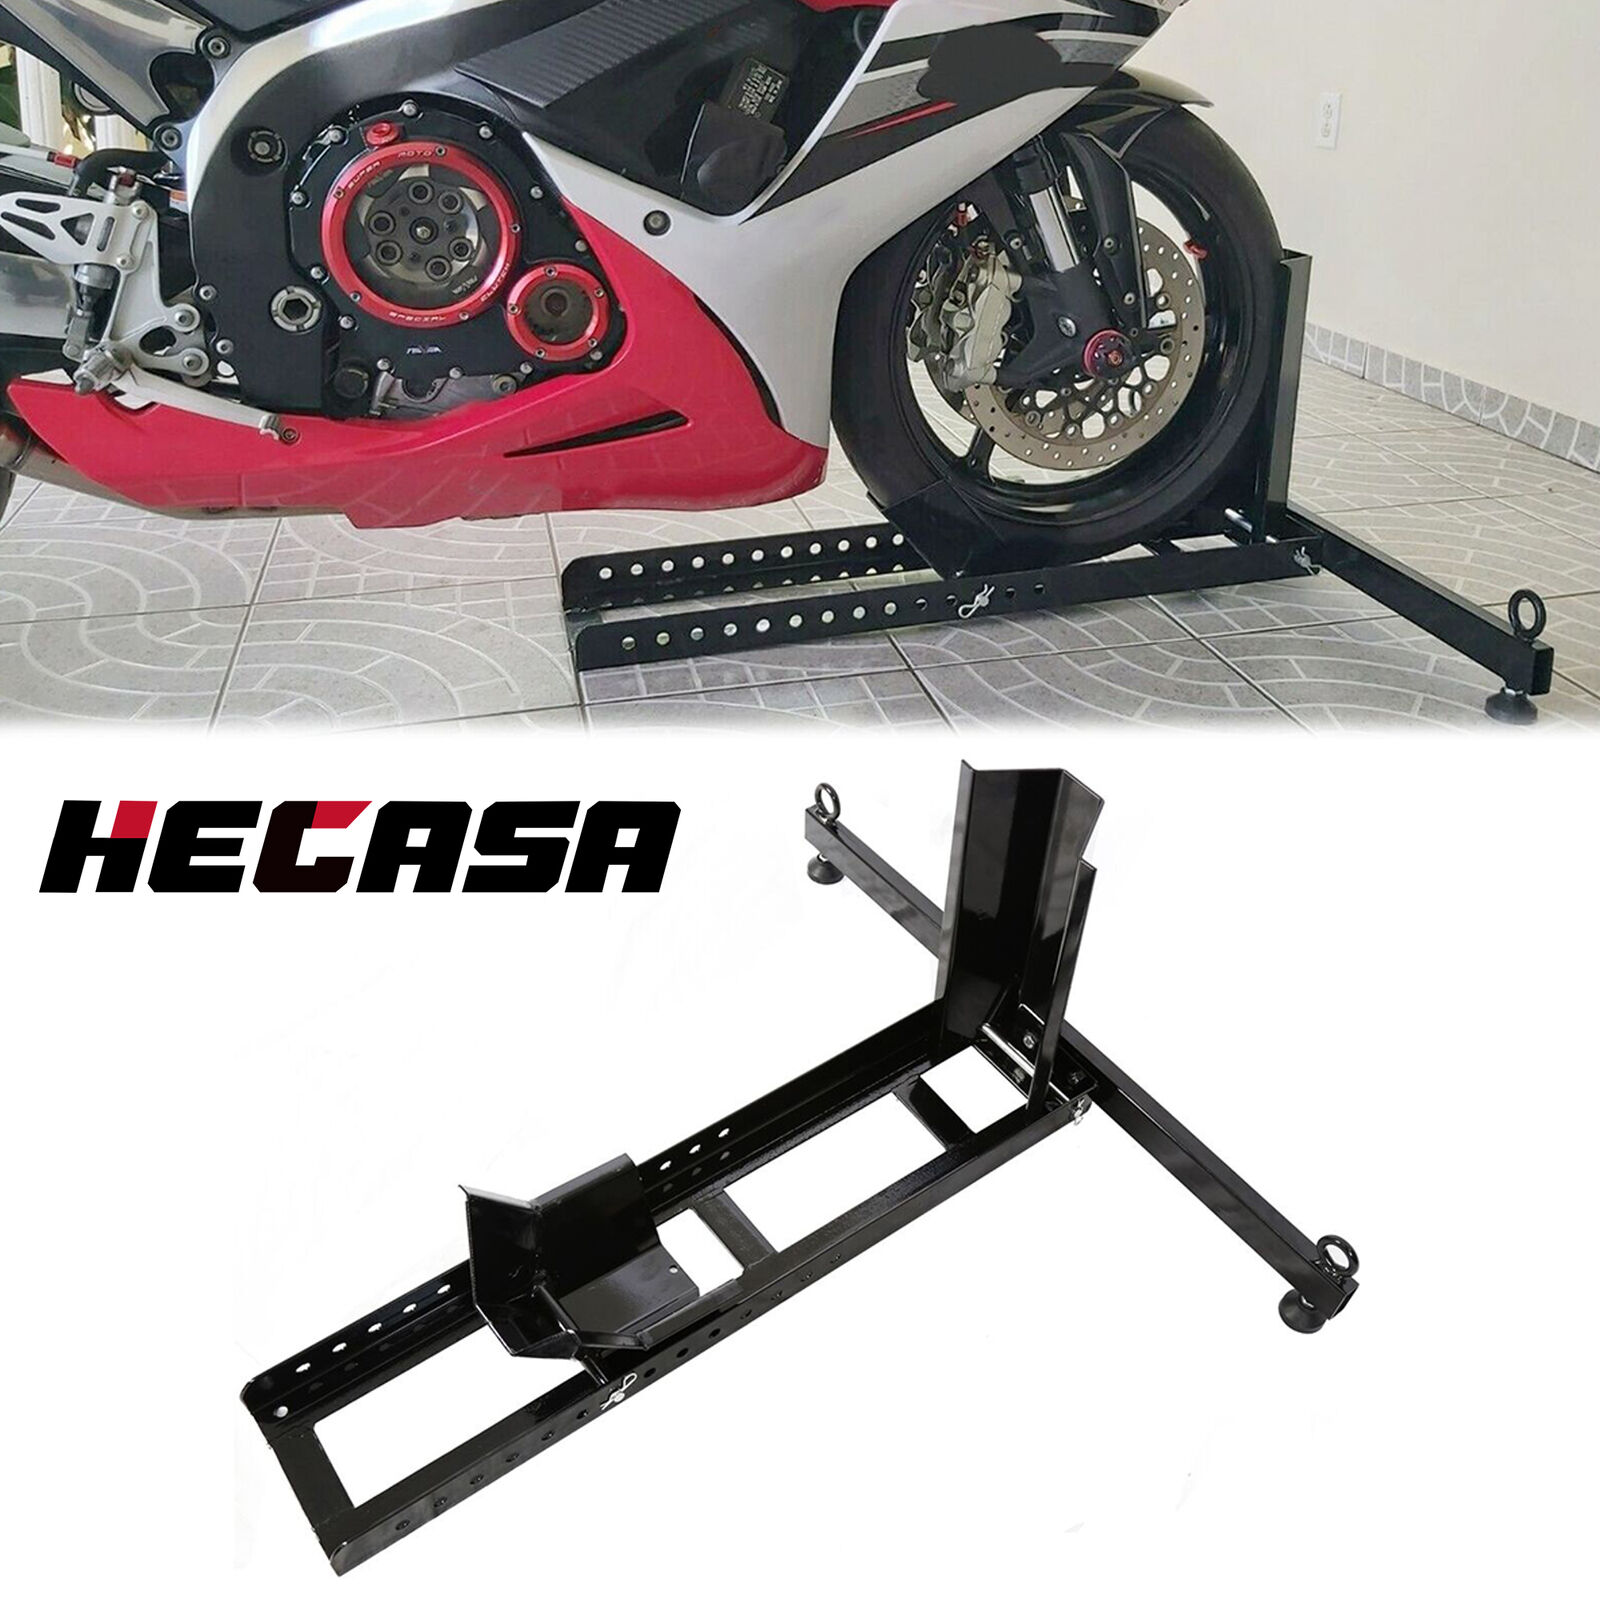 HECASA Adjustable Motorcycle Wheel Chock Upright Stand Support Powder Coated